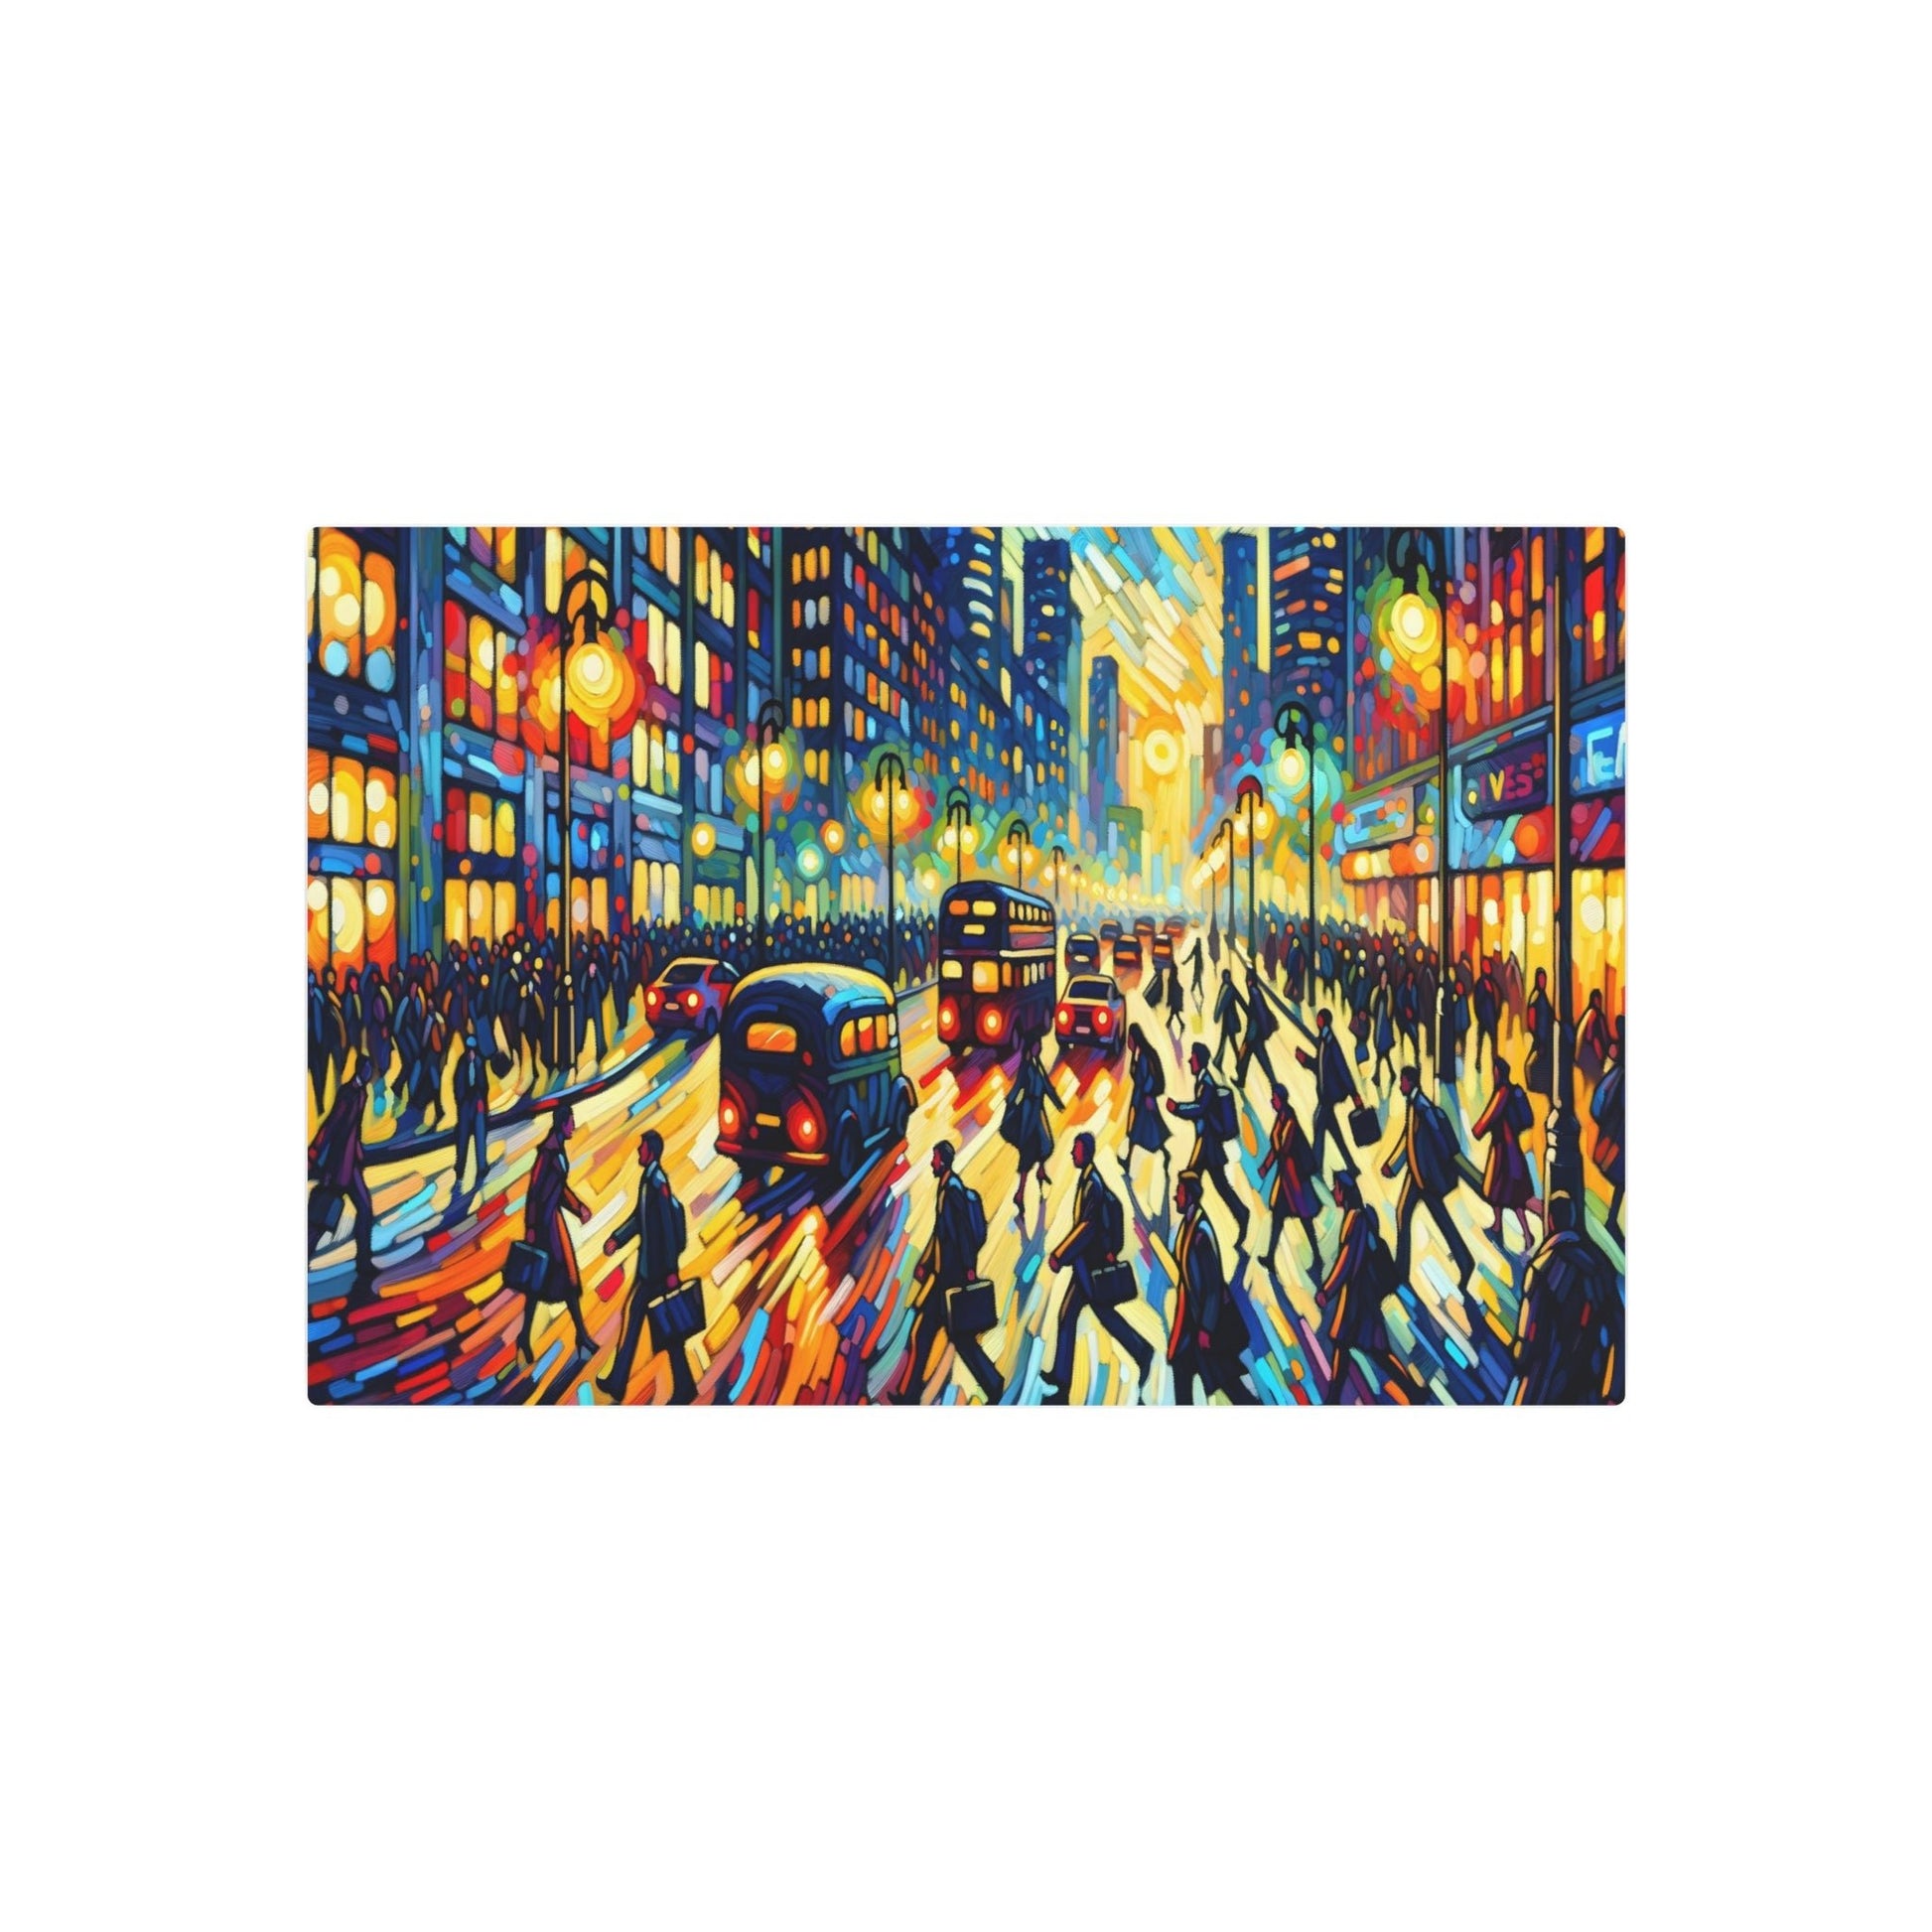 Metal Poster Art | "Expressionist Western Art: Animated City Street Scene in Evening - Vibrant and Passionate Expressionism Painting of People Rushing Home After Work" - Metal Poster Art 30″ x 20″ (Horizontal) 0.12''